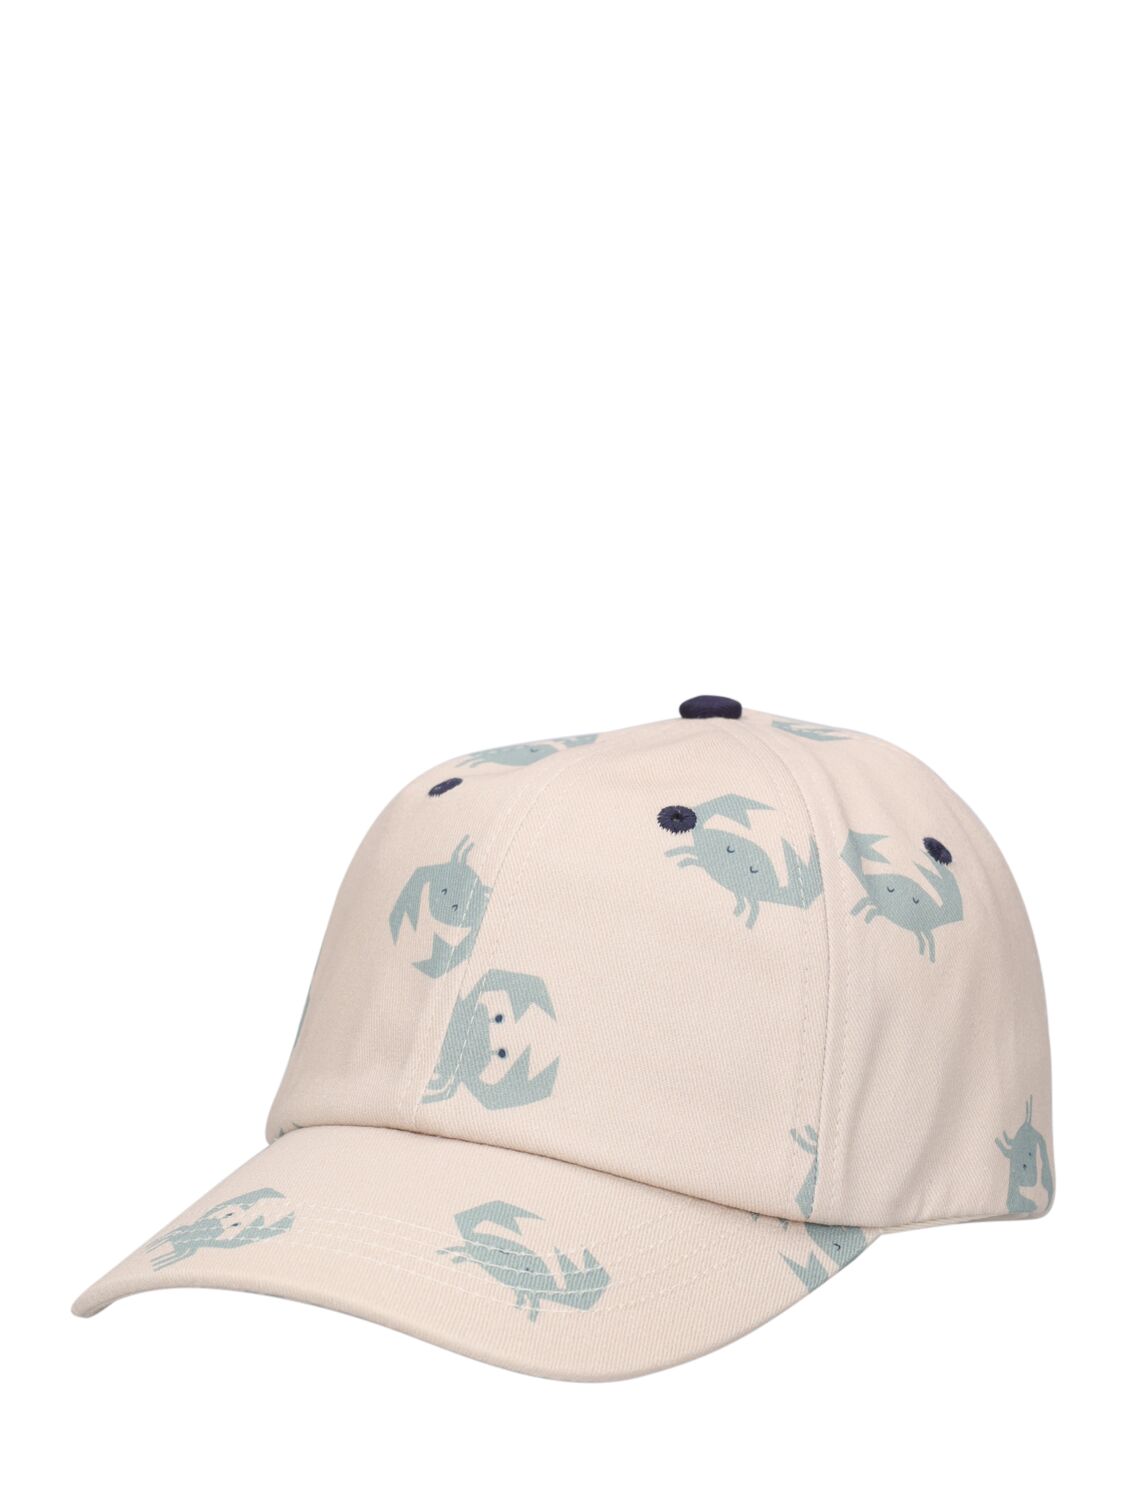 Shop Liewood Crab Print Organic Cotton Hat In Multicolor